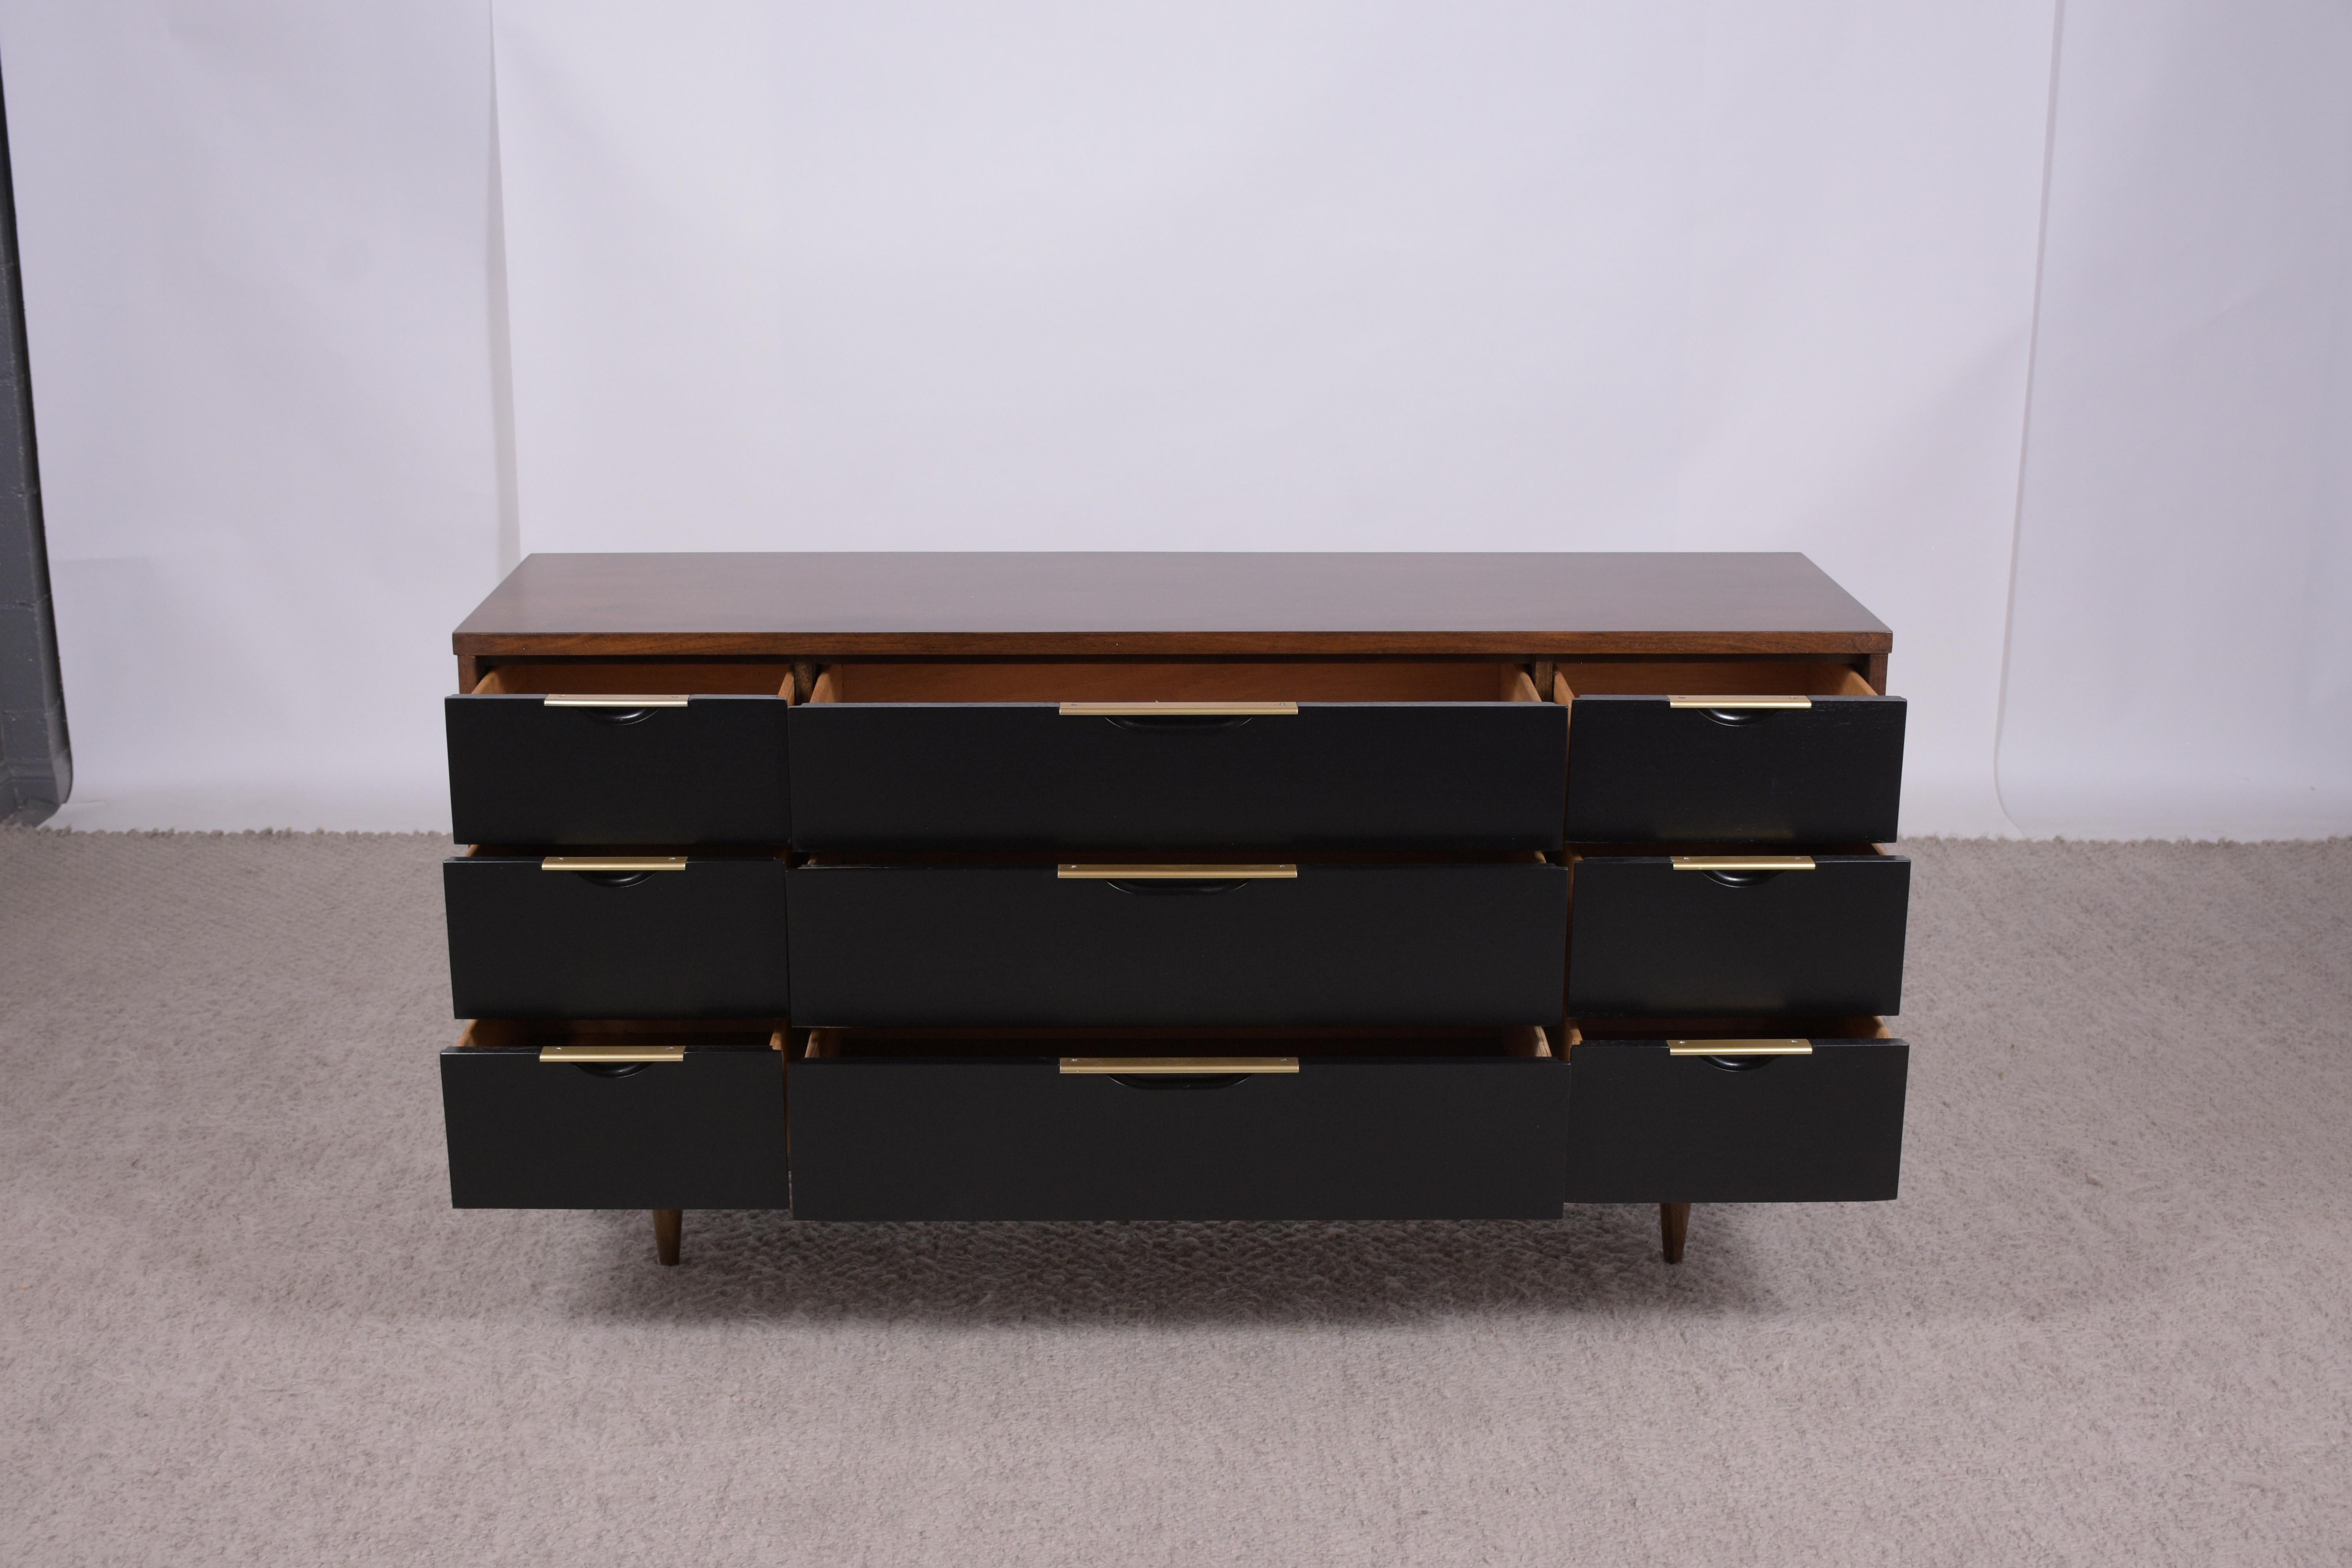 Carved Mid-Century Elegance: Stunning Walnut Dresser with Chrome Accents